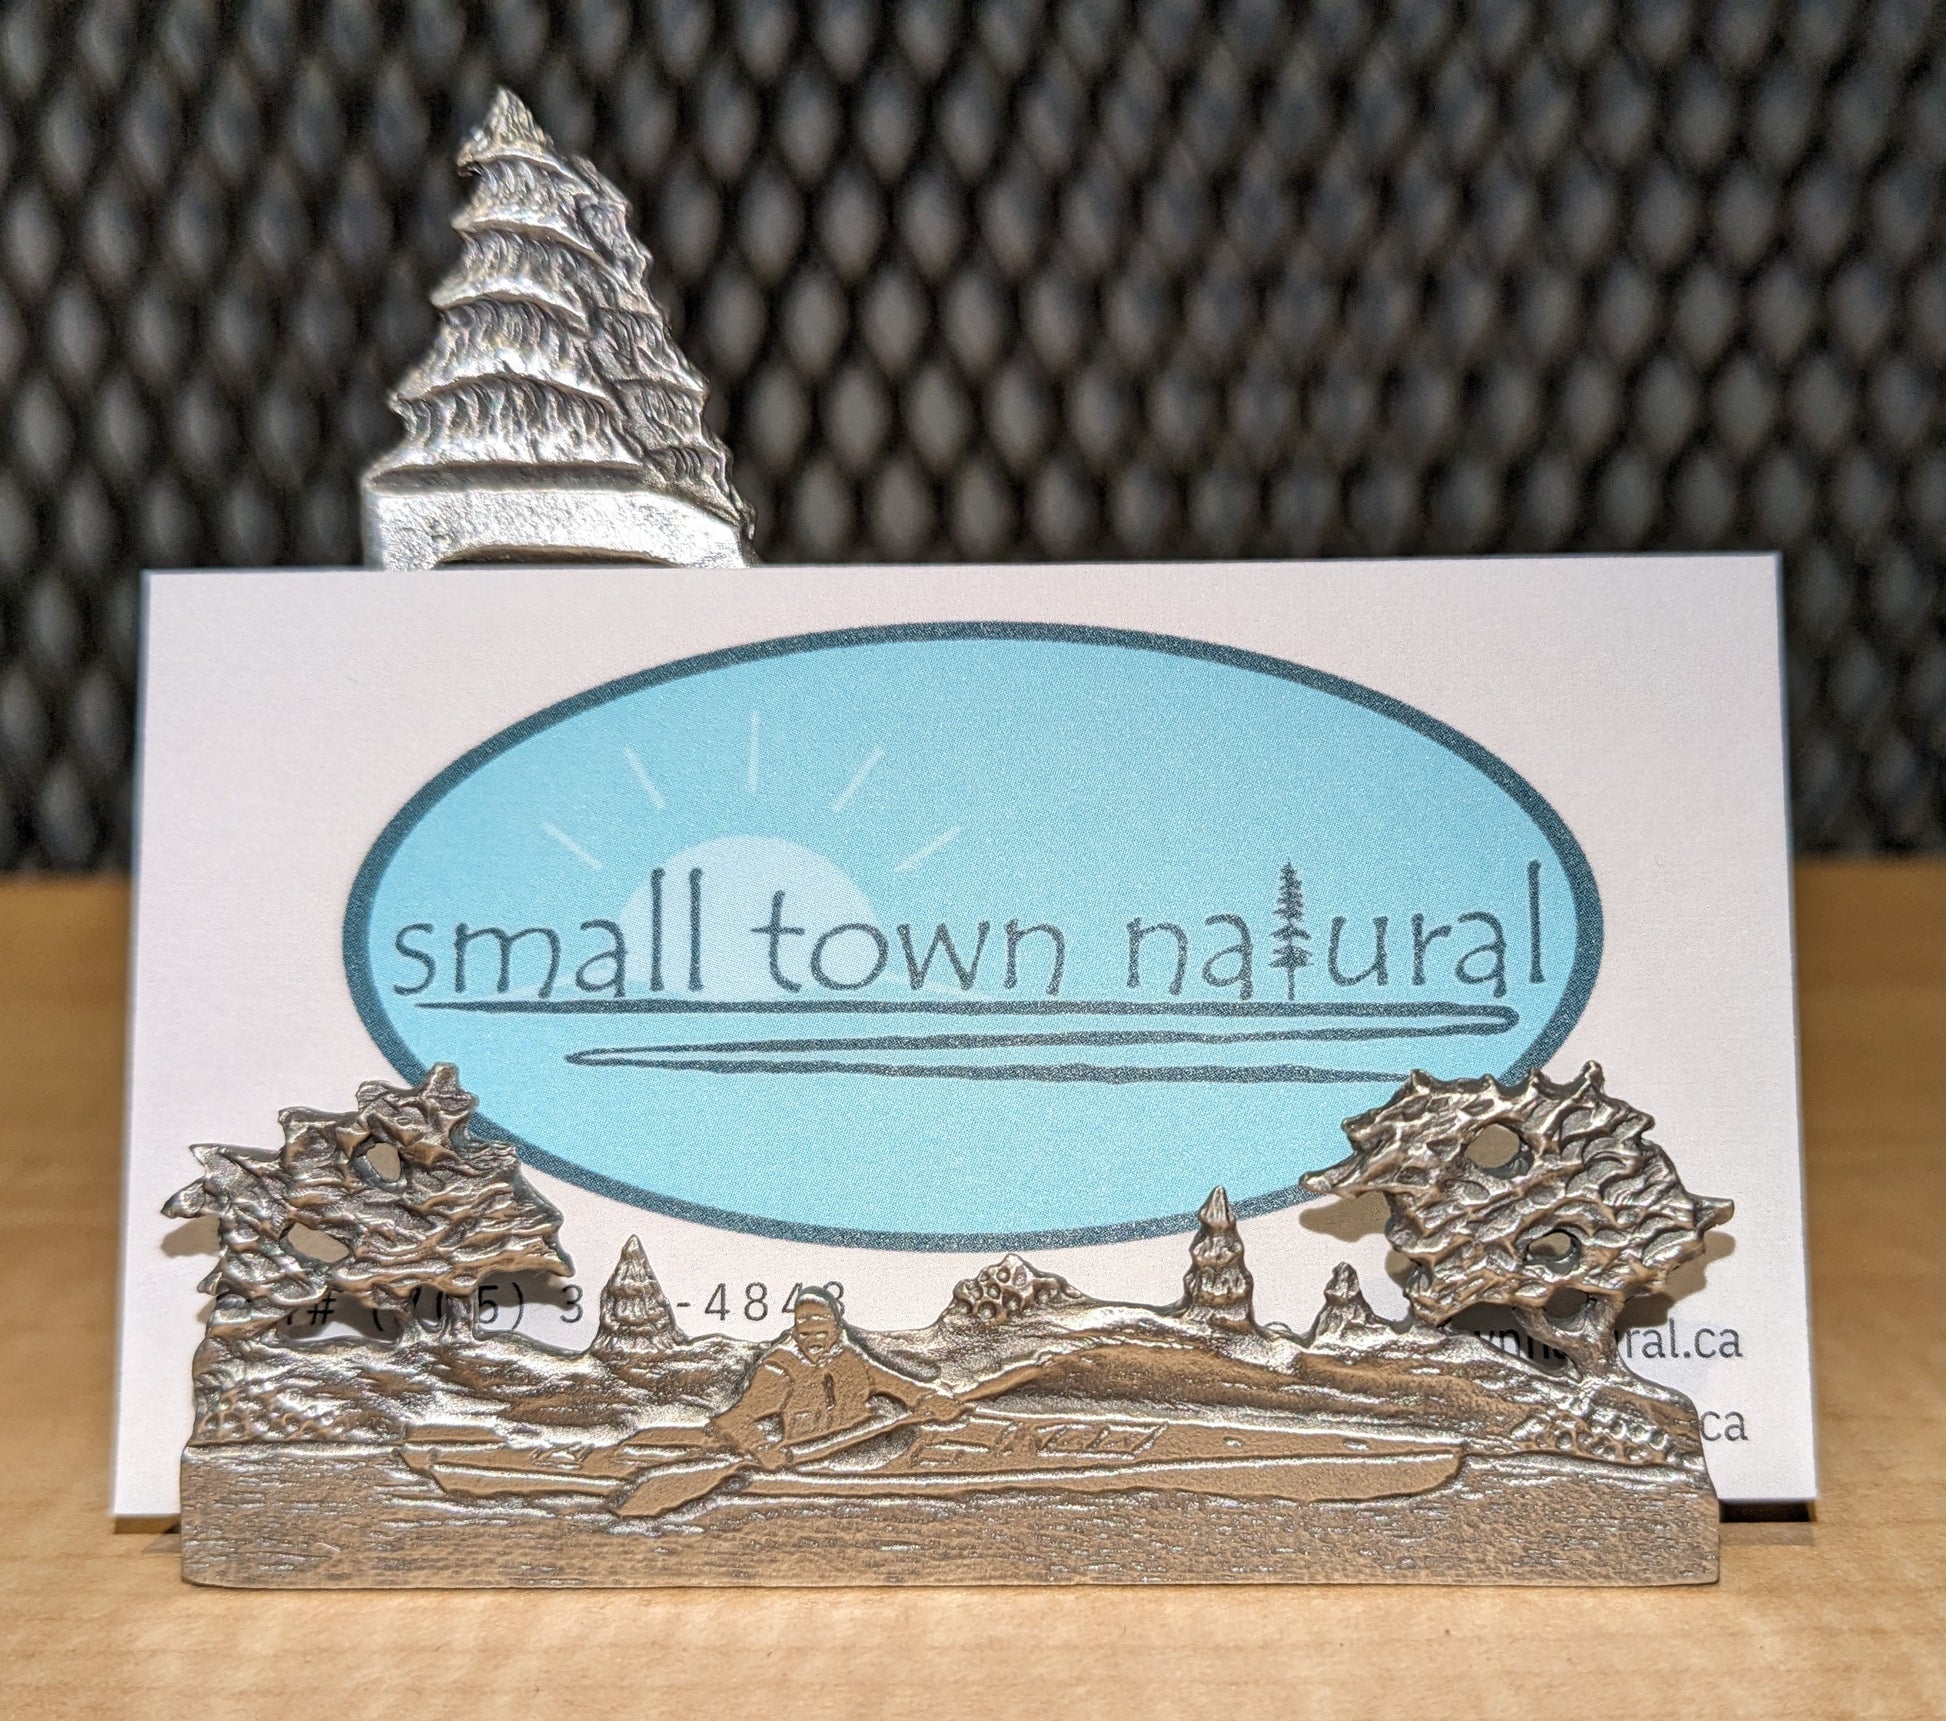 Small Town Natural now carries this outdoorsy business card holder that depicts a scene of a canoer paddling in the wilderness with a couple spruce trees in the background + other trees and shrubs in foreground. Great for any outdoor adventuring biz or the outdoor enthusiast's work or office desk. All pewter. Handmade in Ontario Canada since 1972